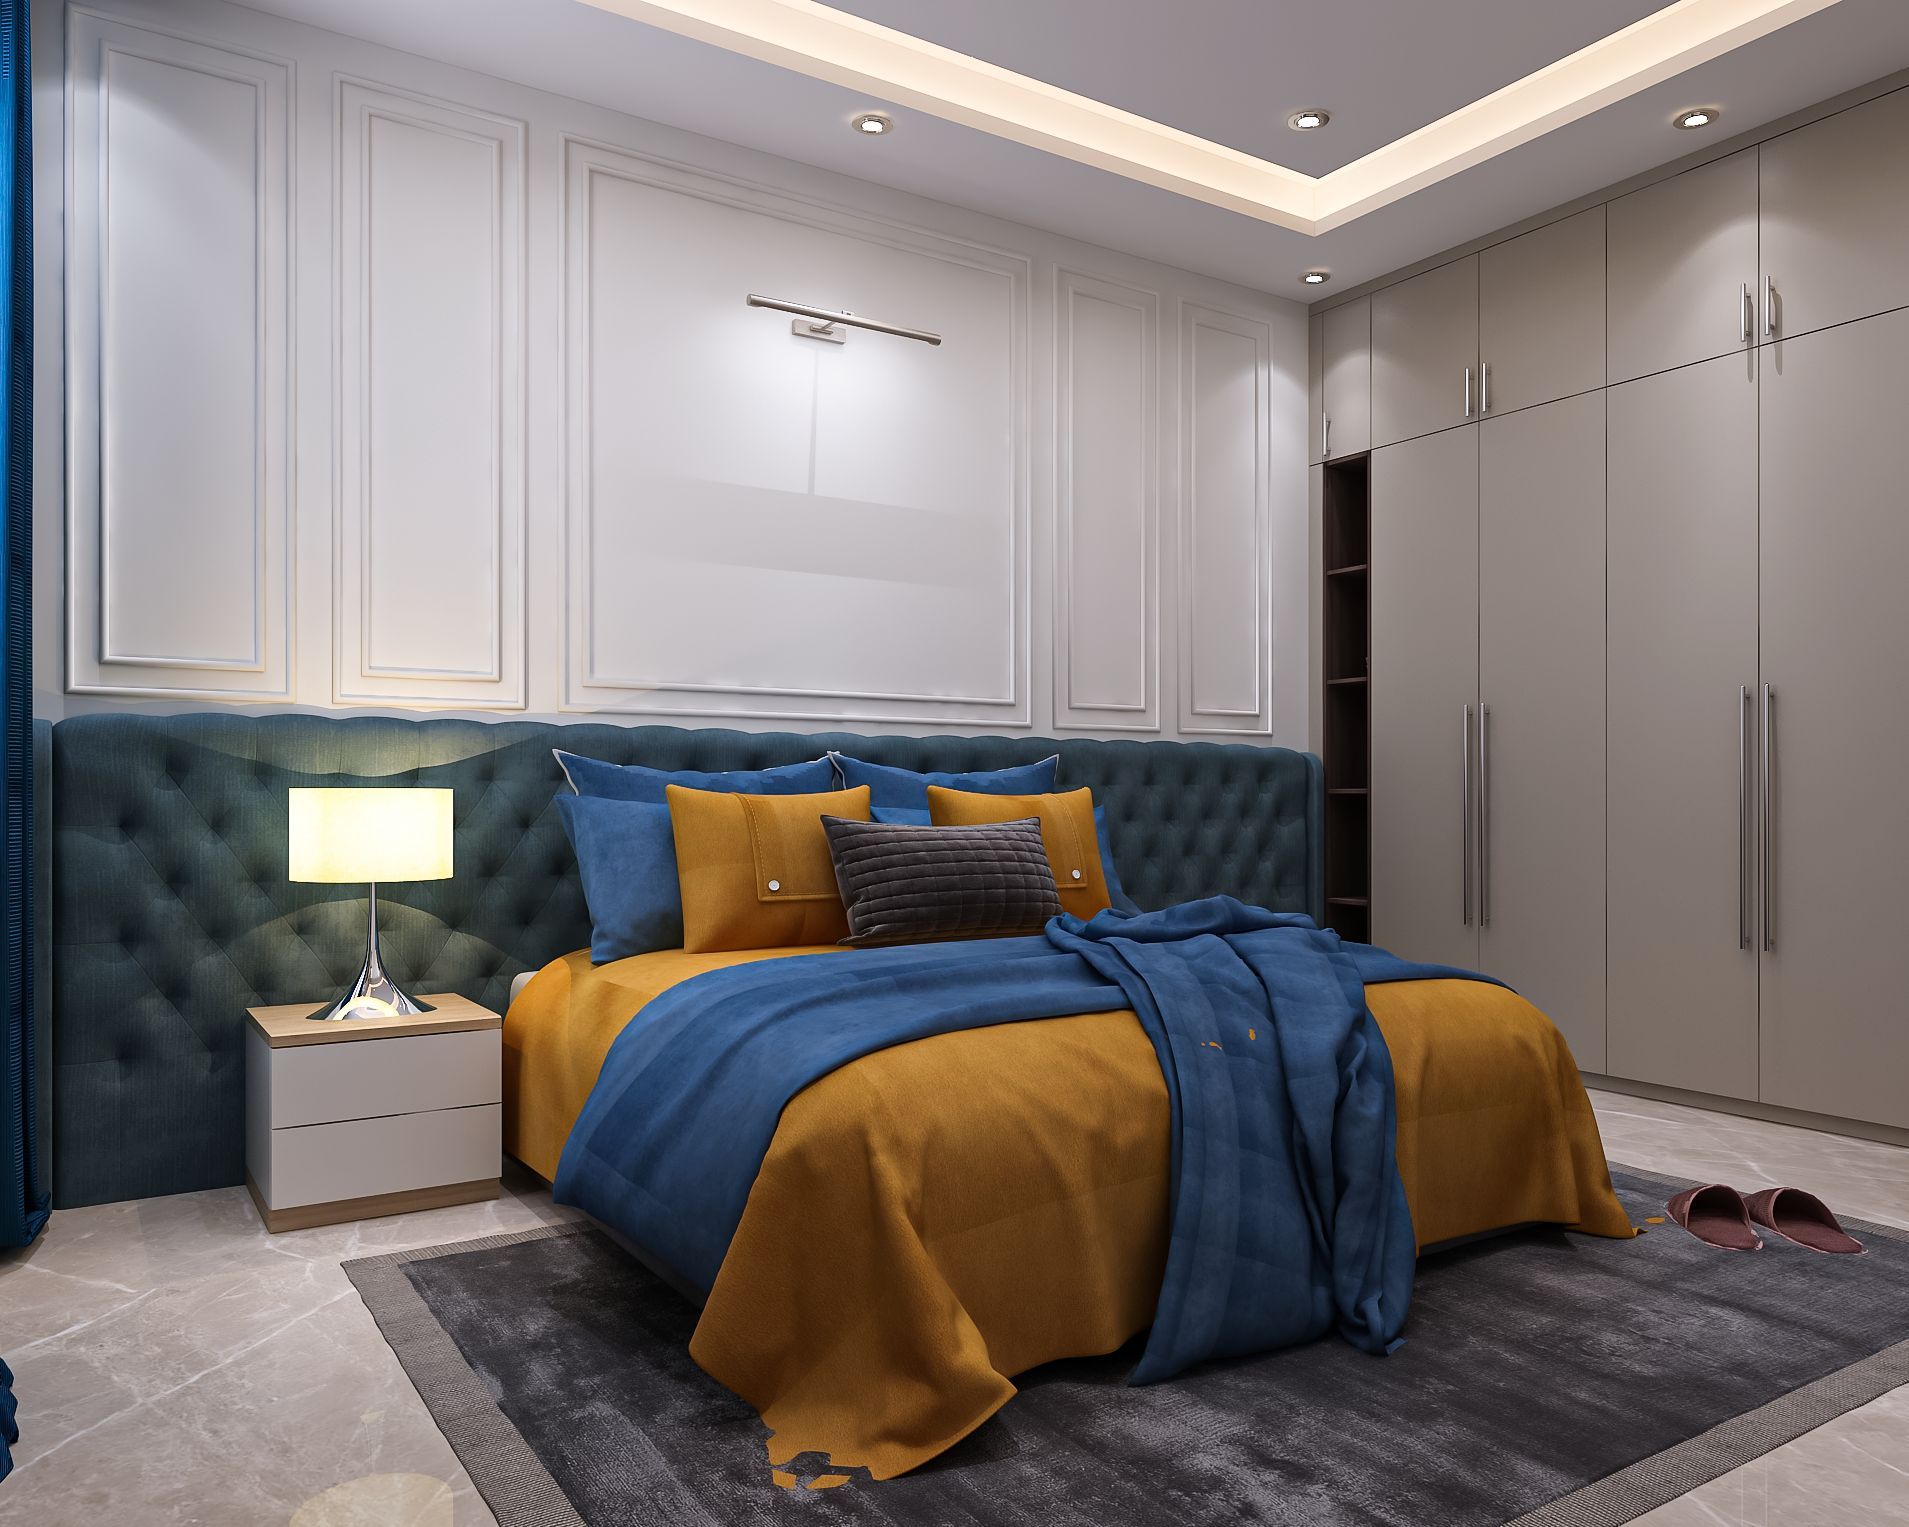 Spacious Bedroom Design With A King Size Bed